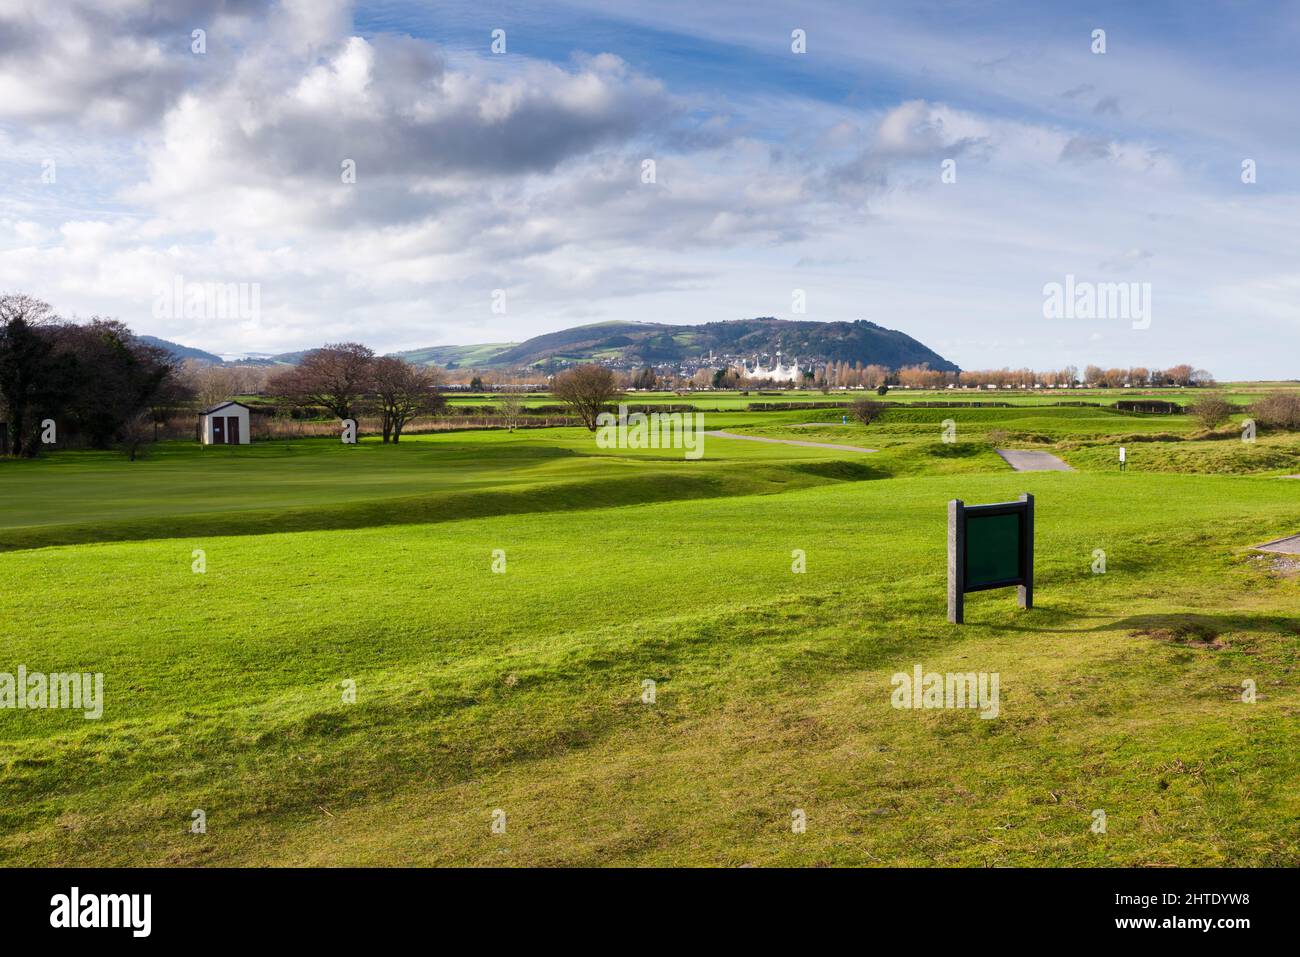 The Minehead and West Somerset Golf Club from the coast path with Minehead and the hills of Exmoor National Park in the distance, Somerset, England. Stock Photo